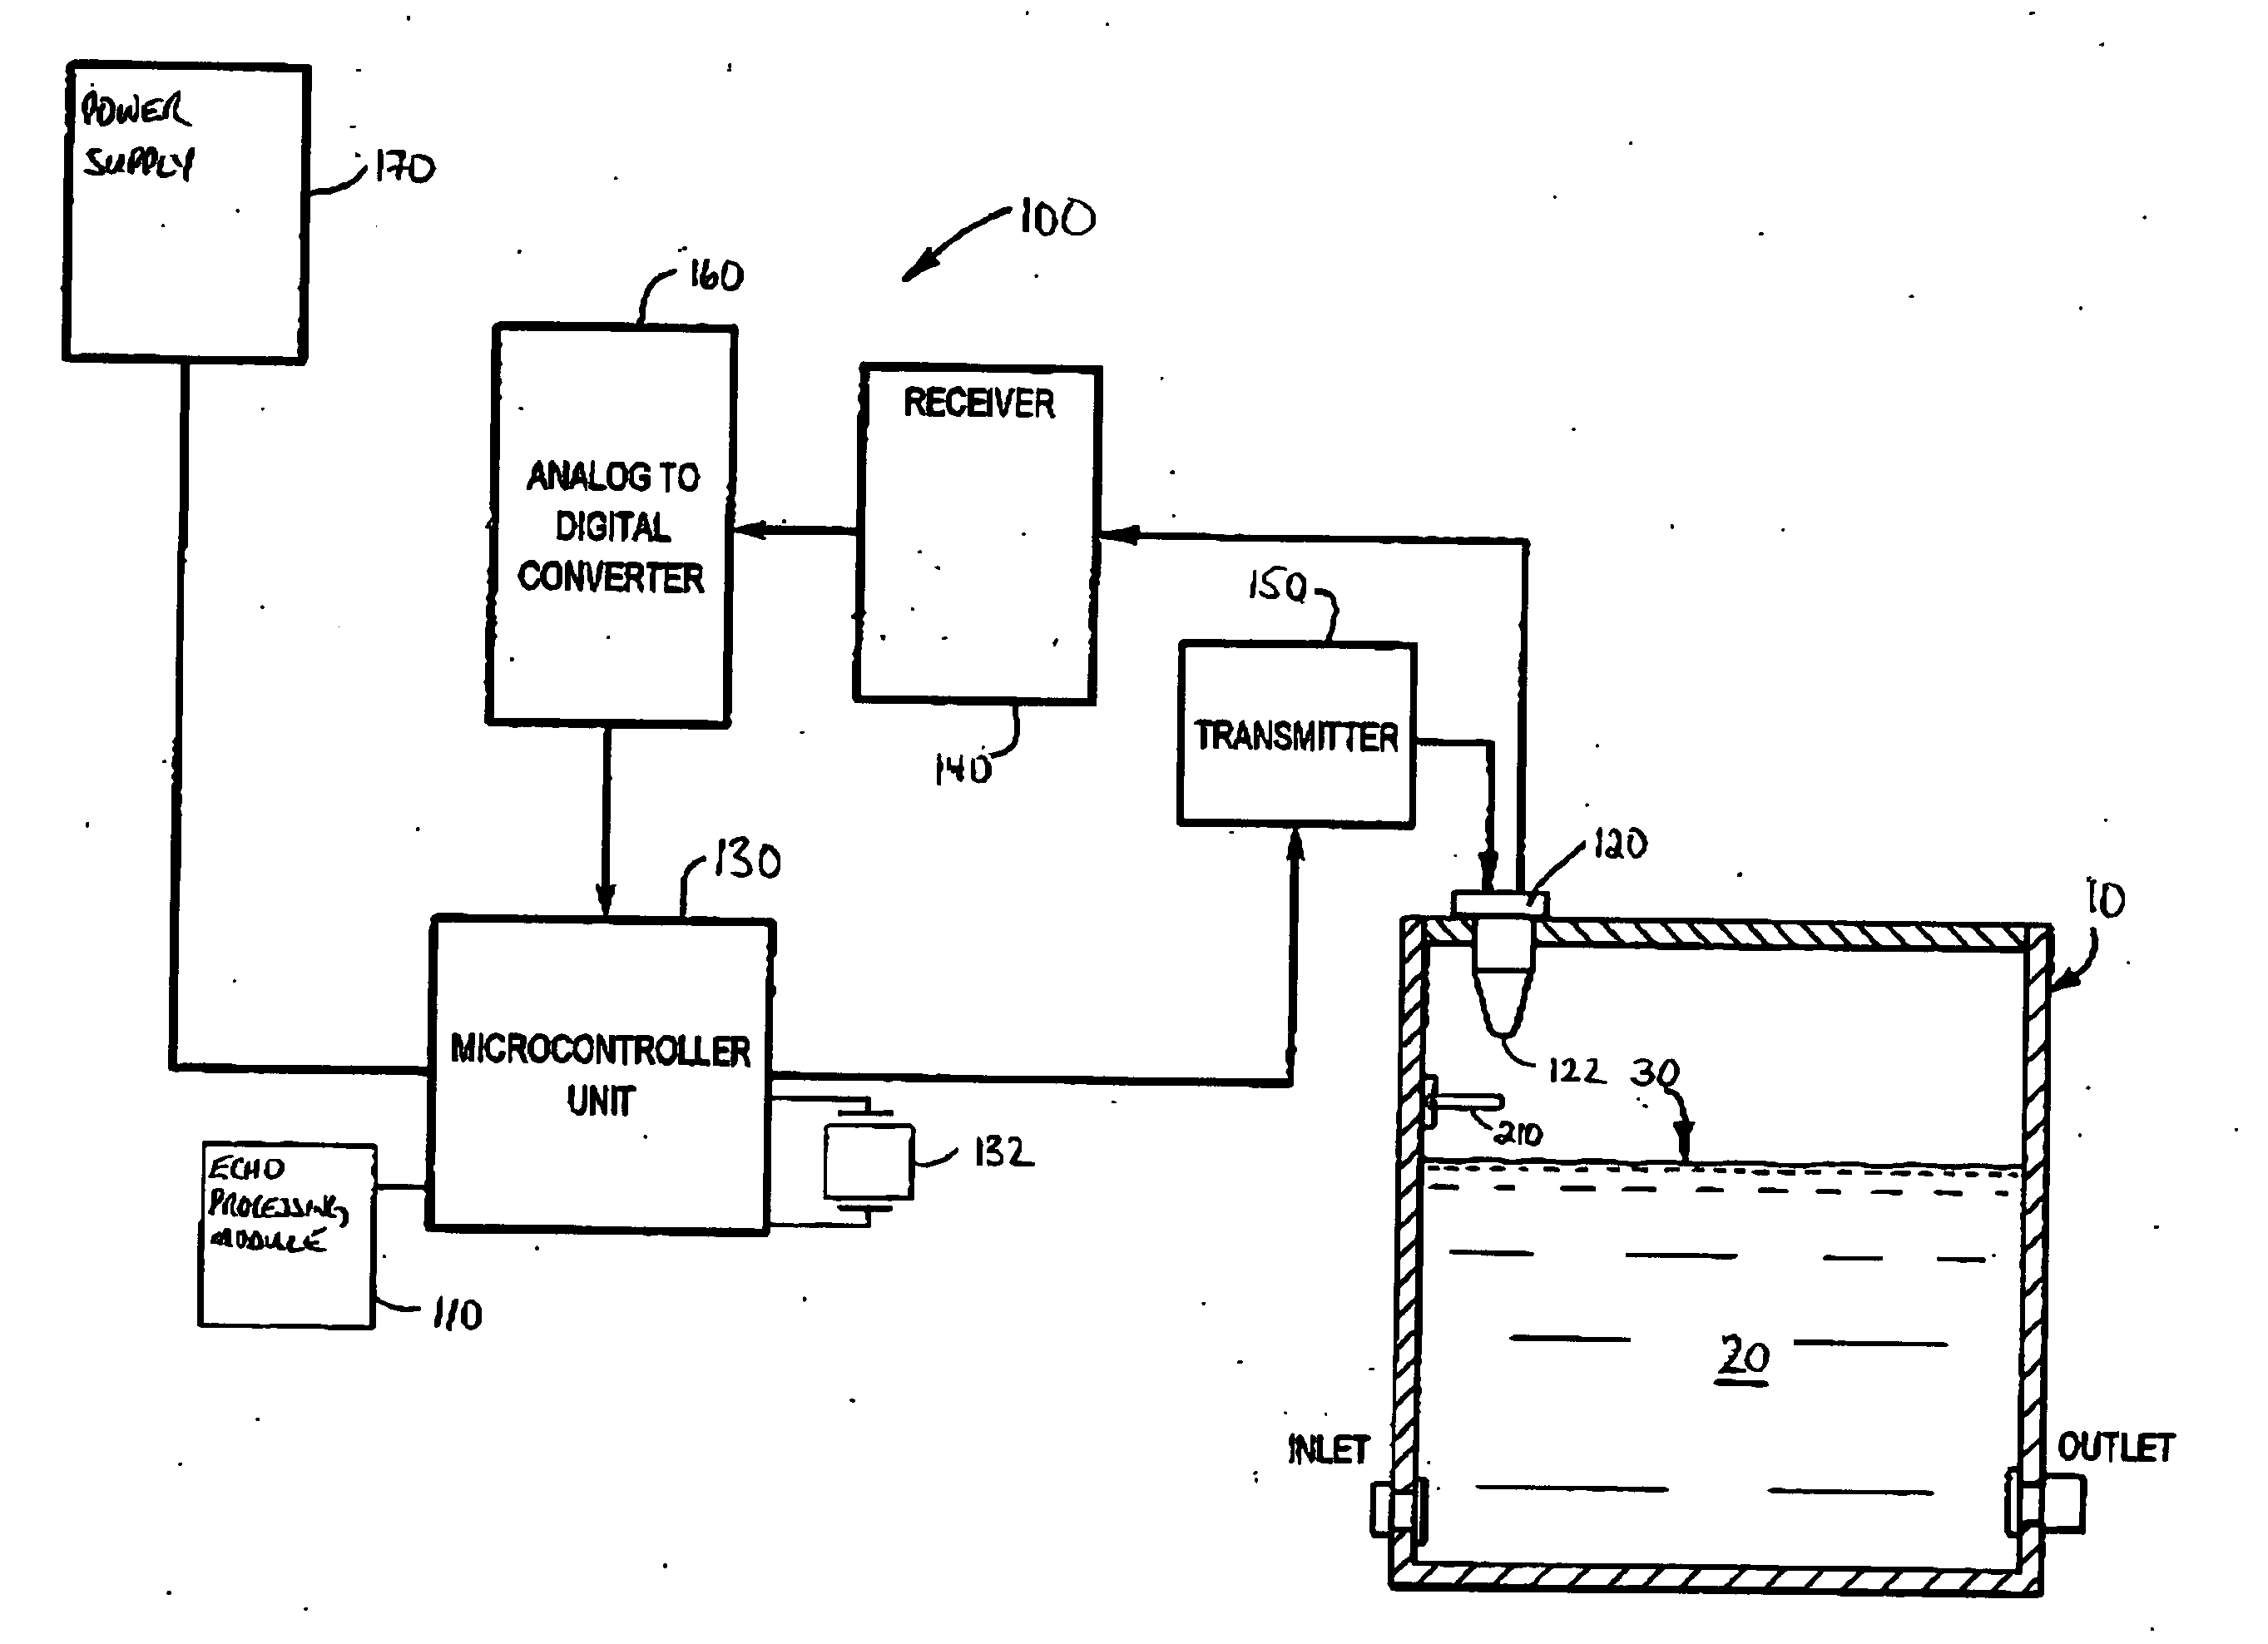 Method and apparatus for pulse-by-pulse calibration of a pulse-echo ranging system